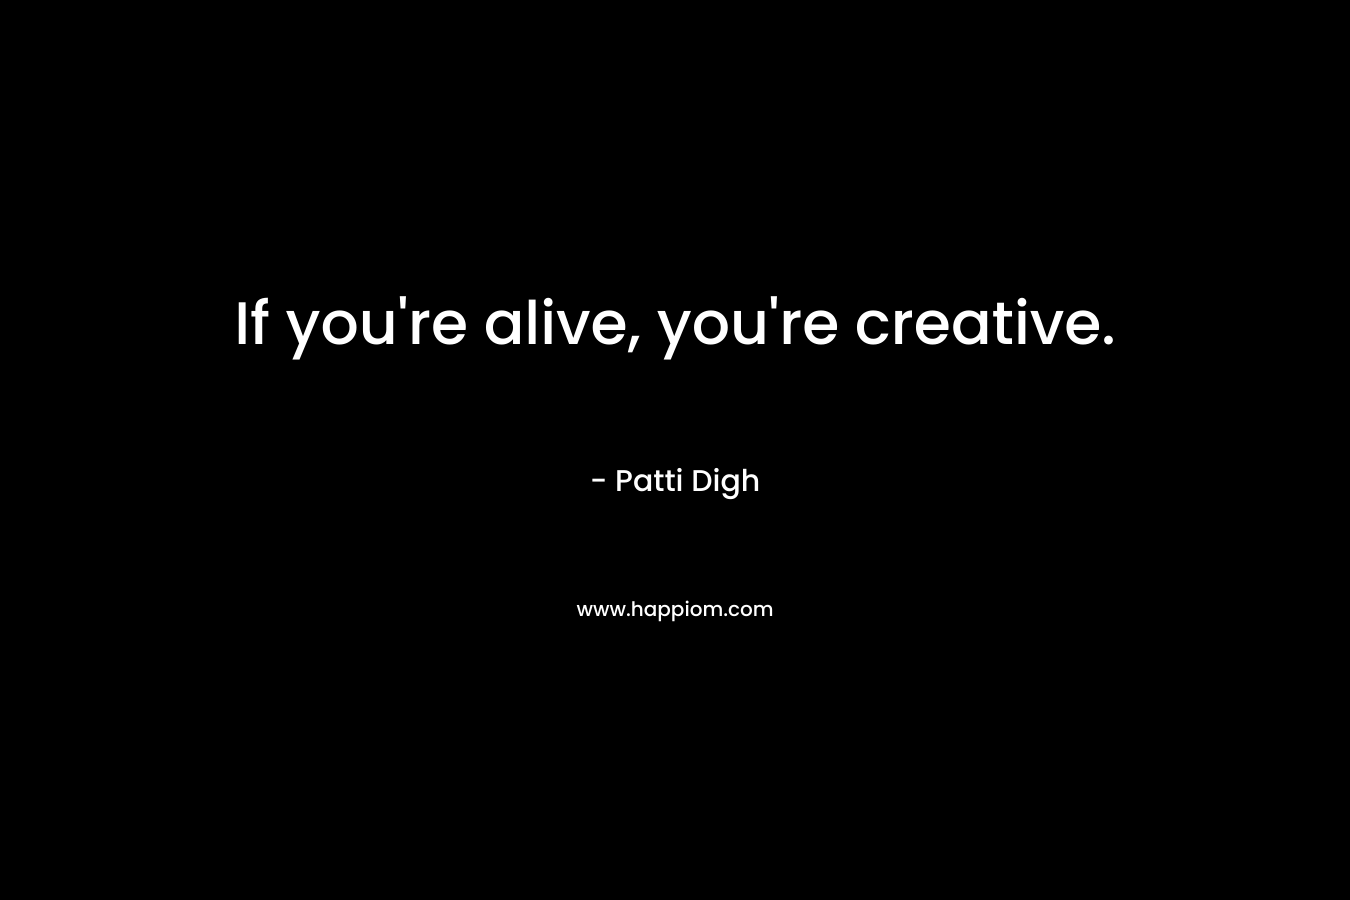 If you're alive, you're creative.